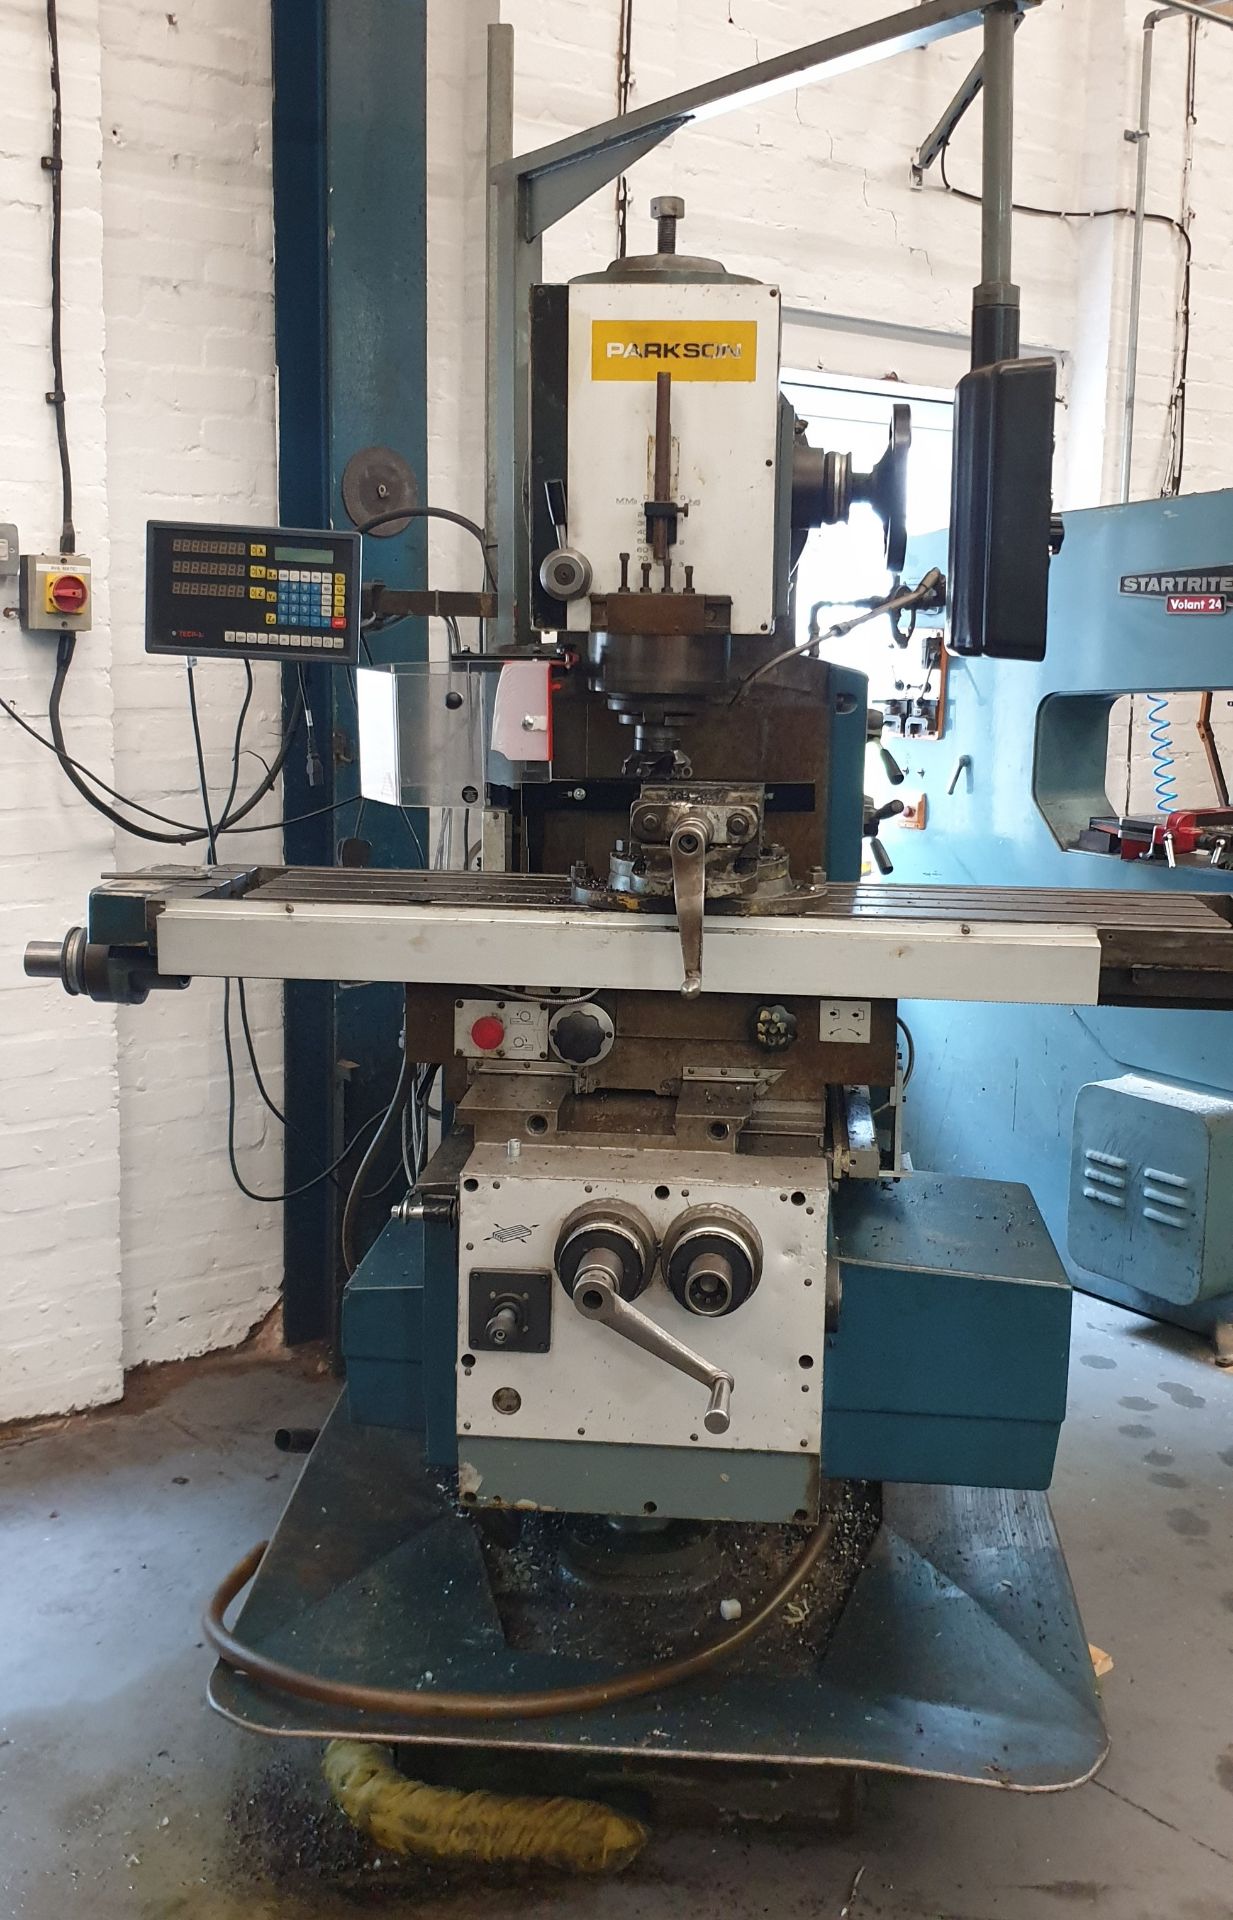 Parkson M1200 Vertical Milling Machine Fitted With A Tech 3i 3-Axis DRO, Serial Number: Unknown